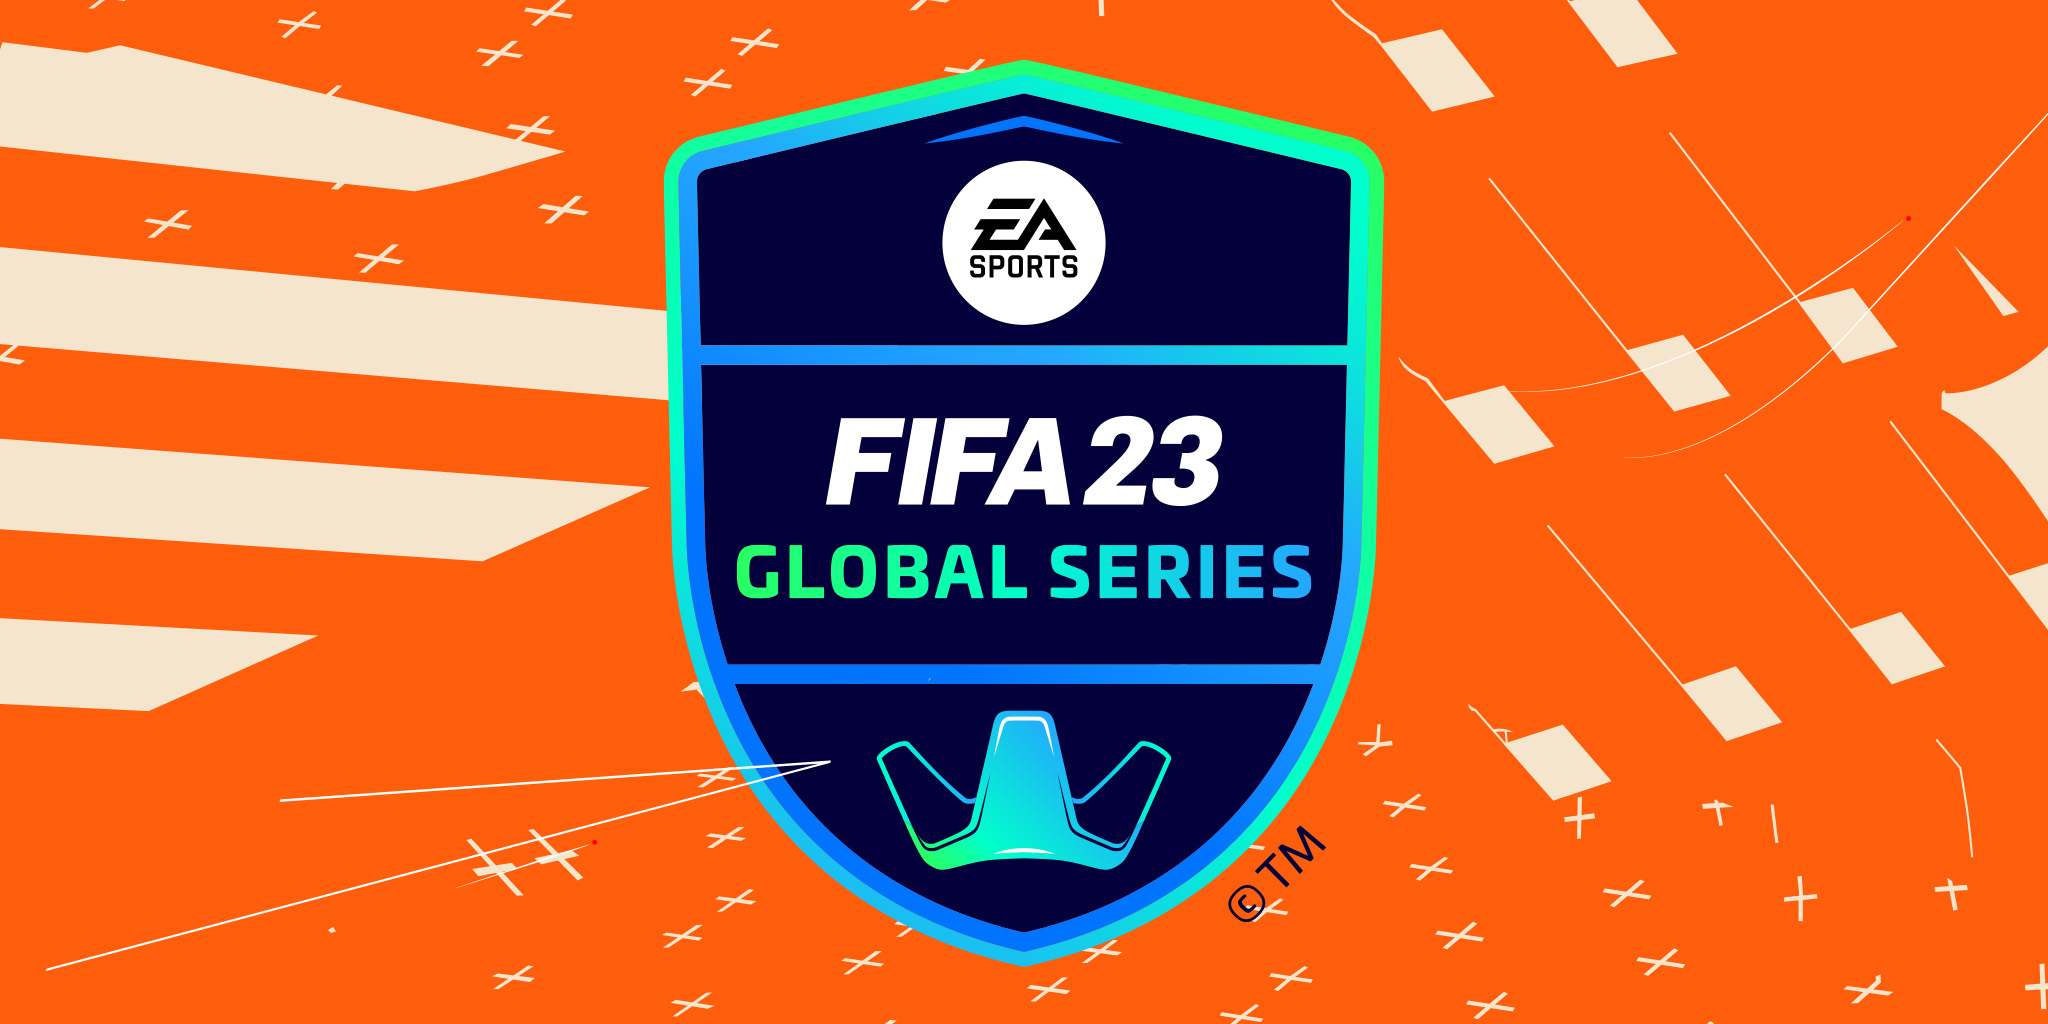 EA Sports Full Reveal FIFA 23 To Be Released In September